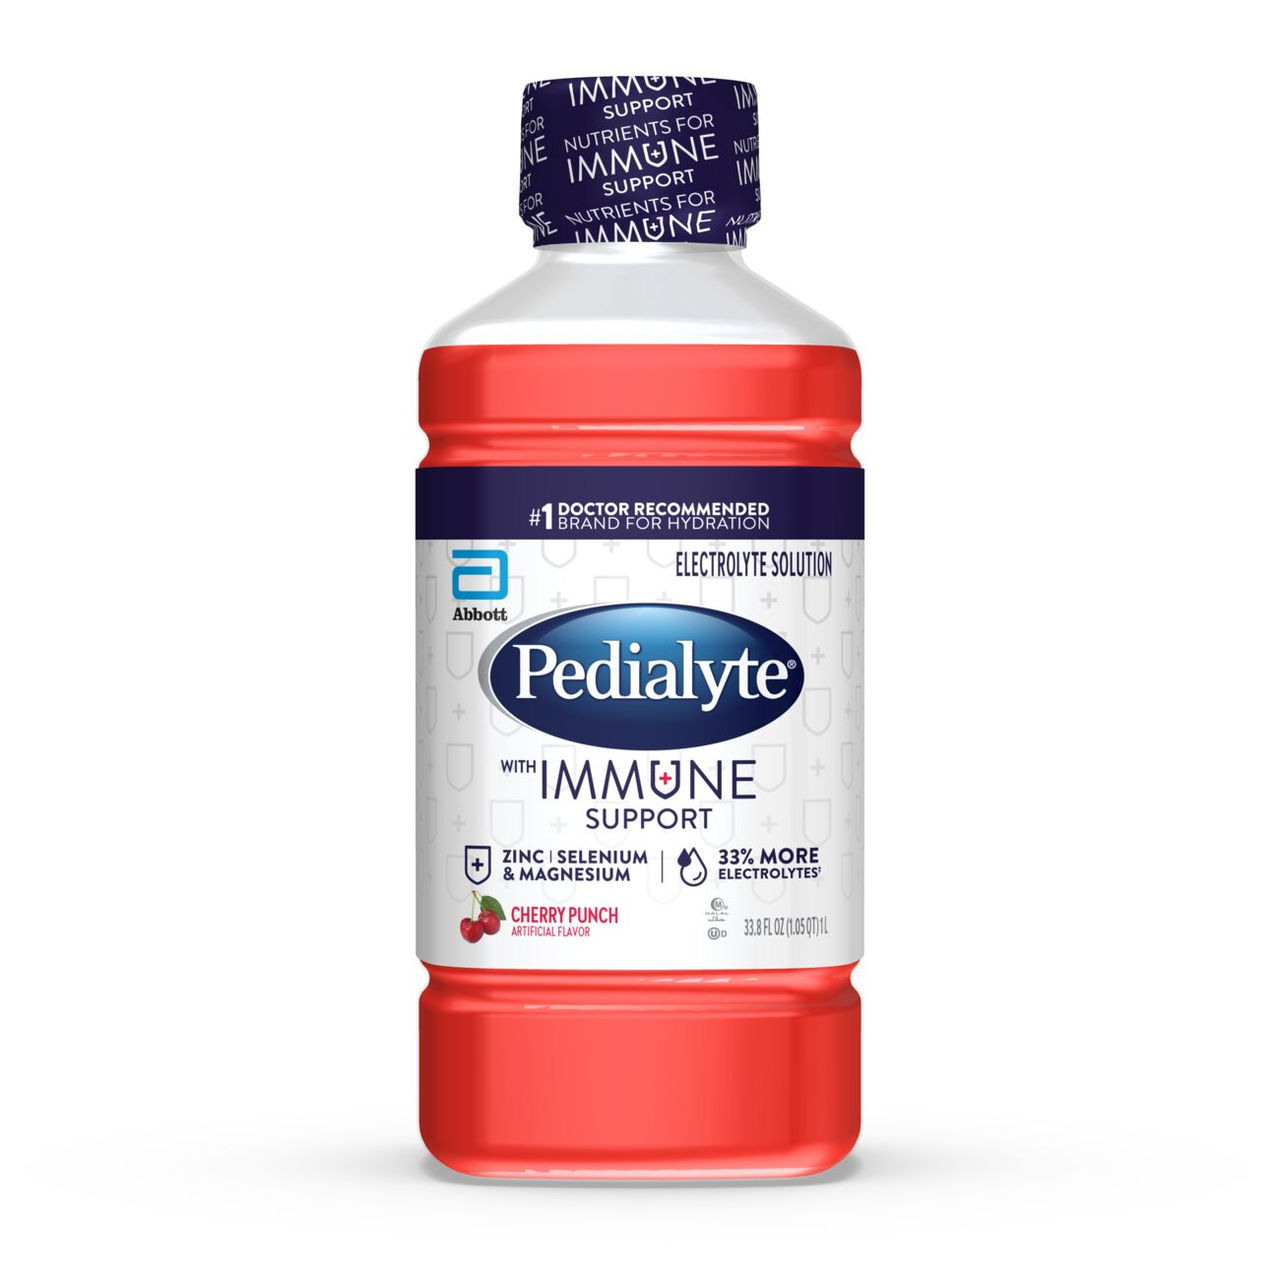 Pedialyte with Immune Support Cherry Punch flavor